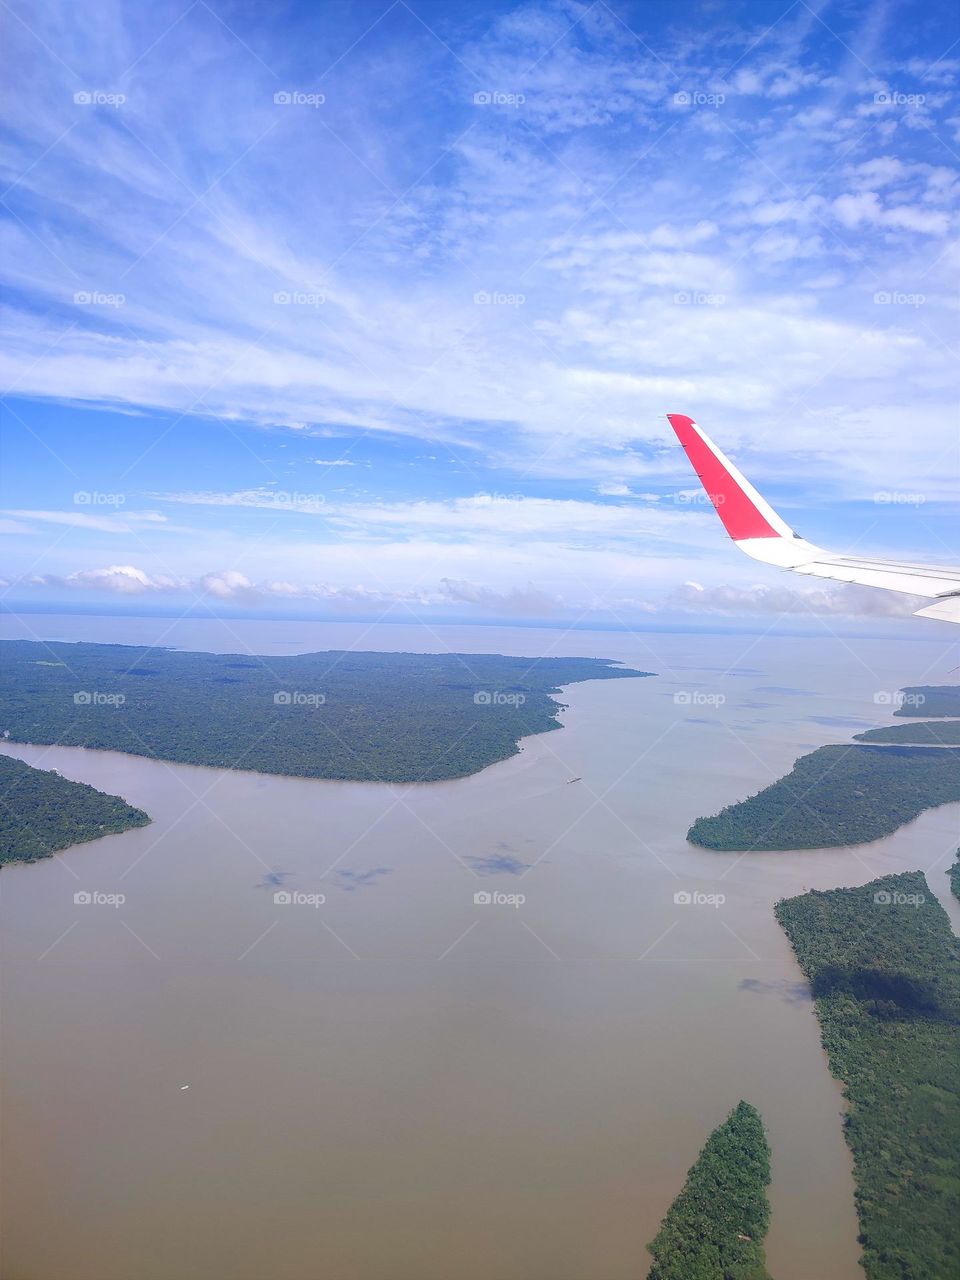 Above the Guamá river.